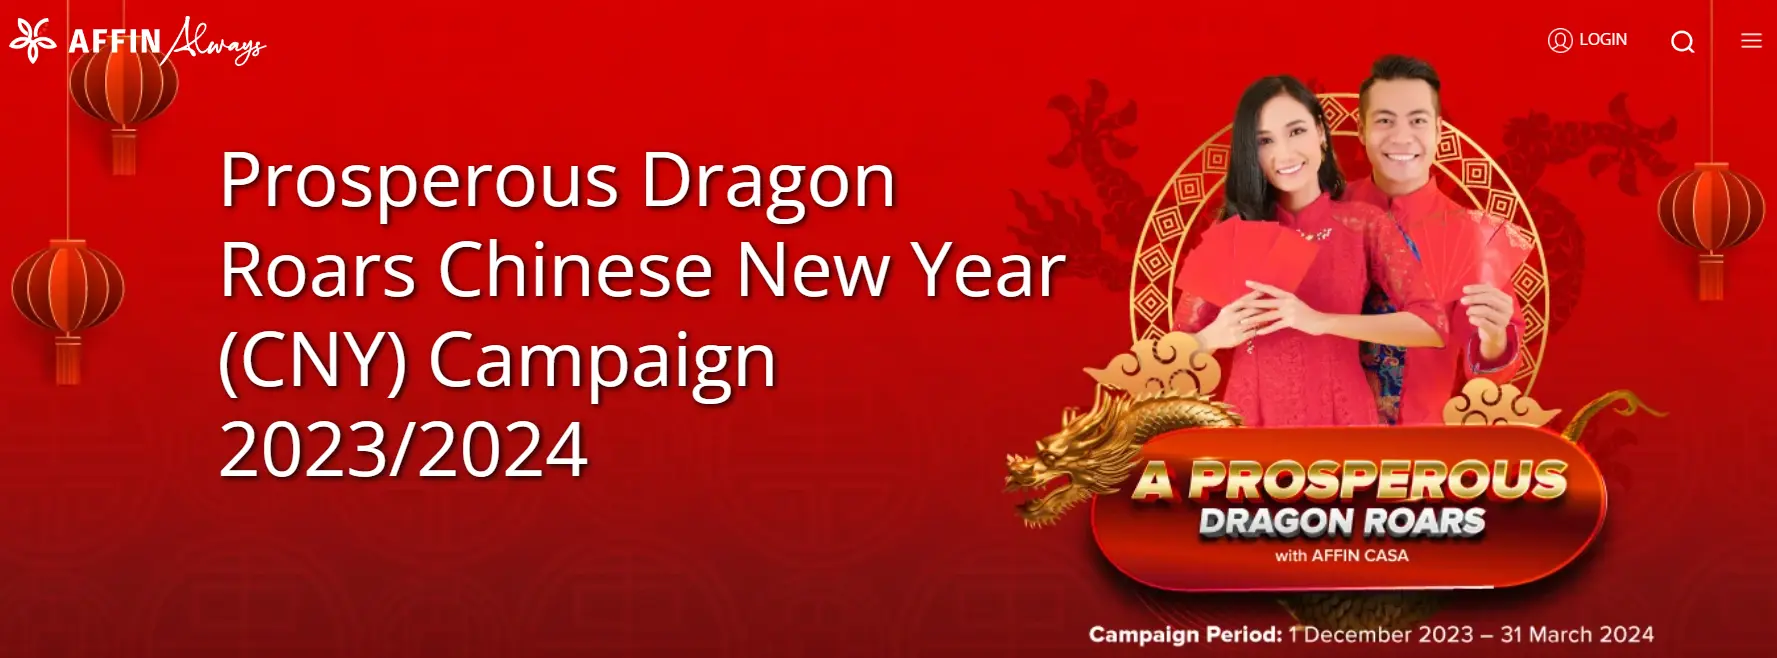 Affin Bank Prosperous Dragon Roars Chinese New Year (CNY) Campaign 龙年新春储蓄户口优惠活动
